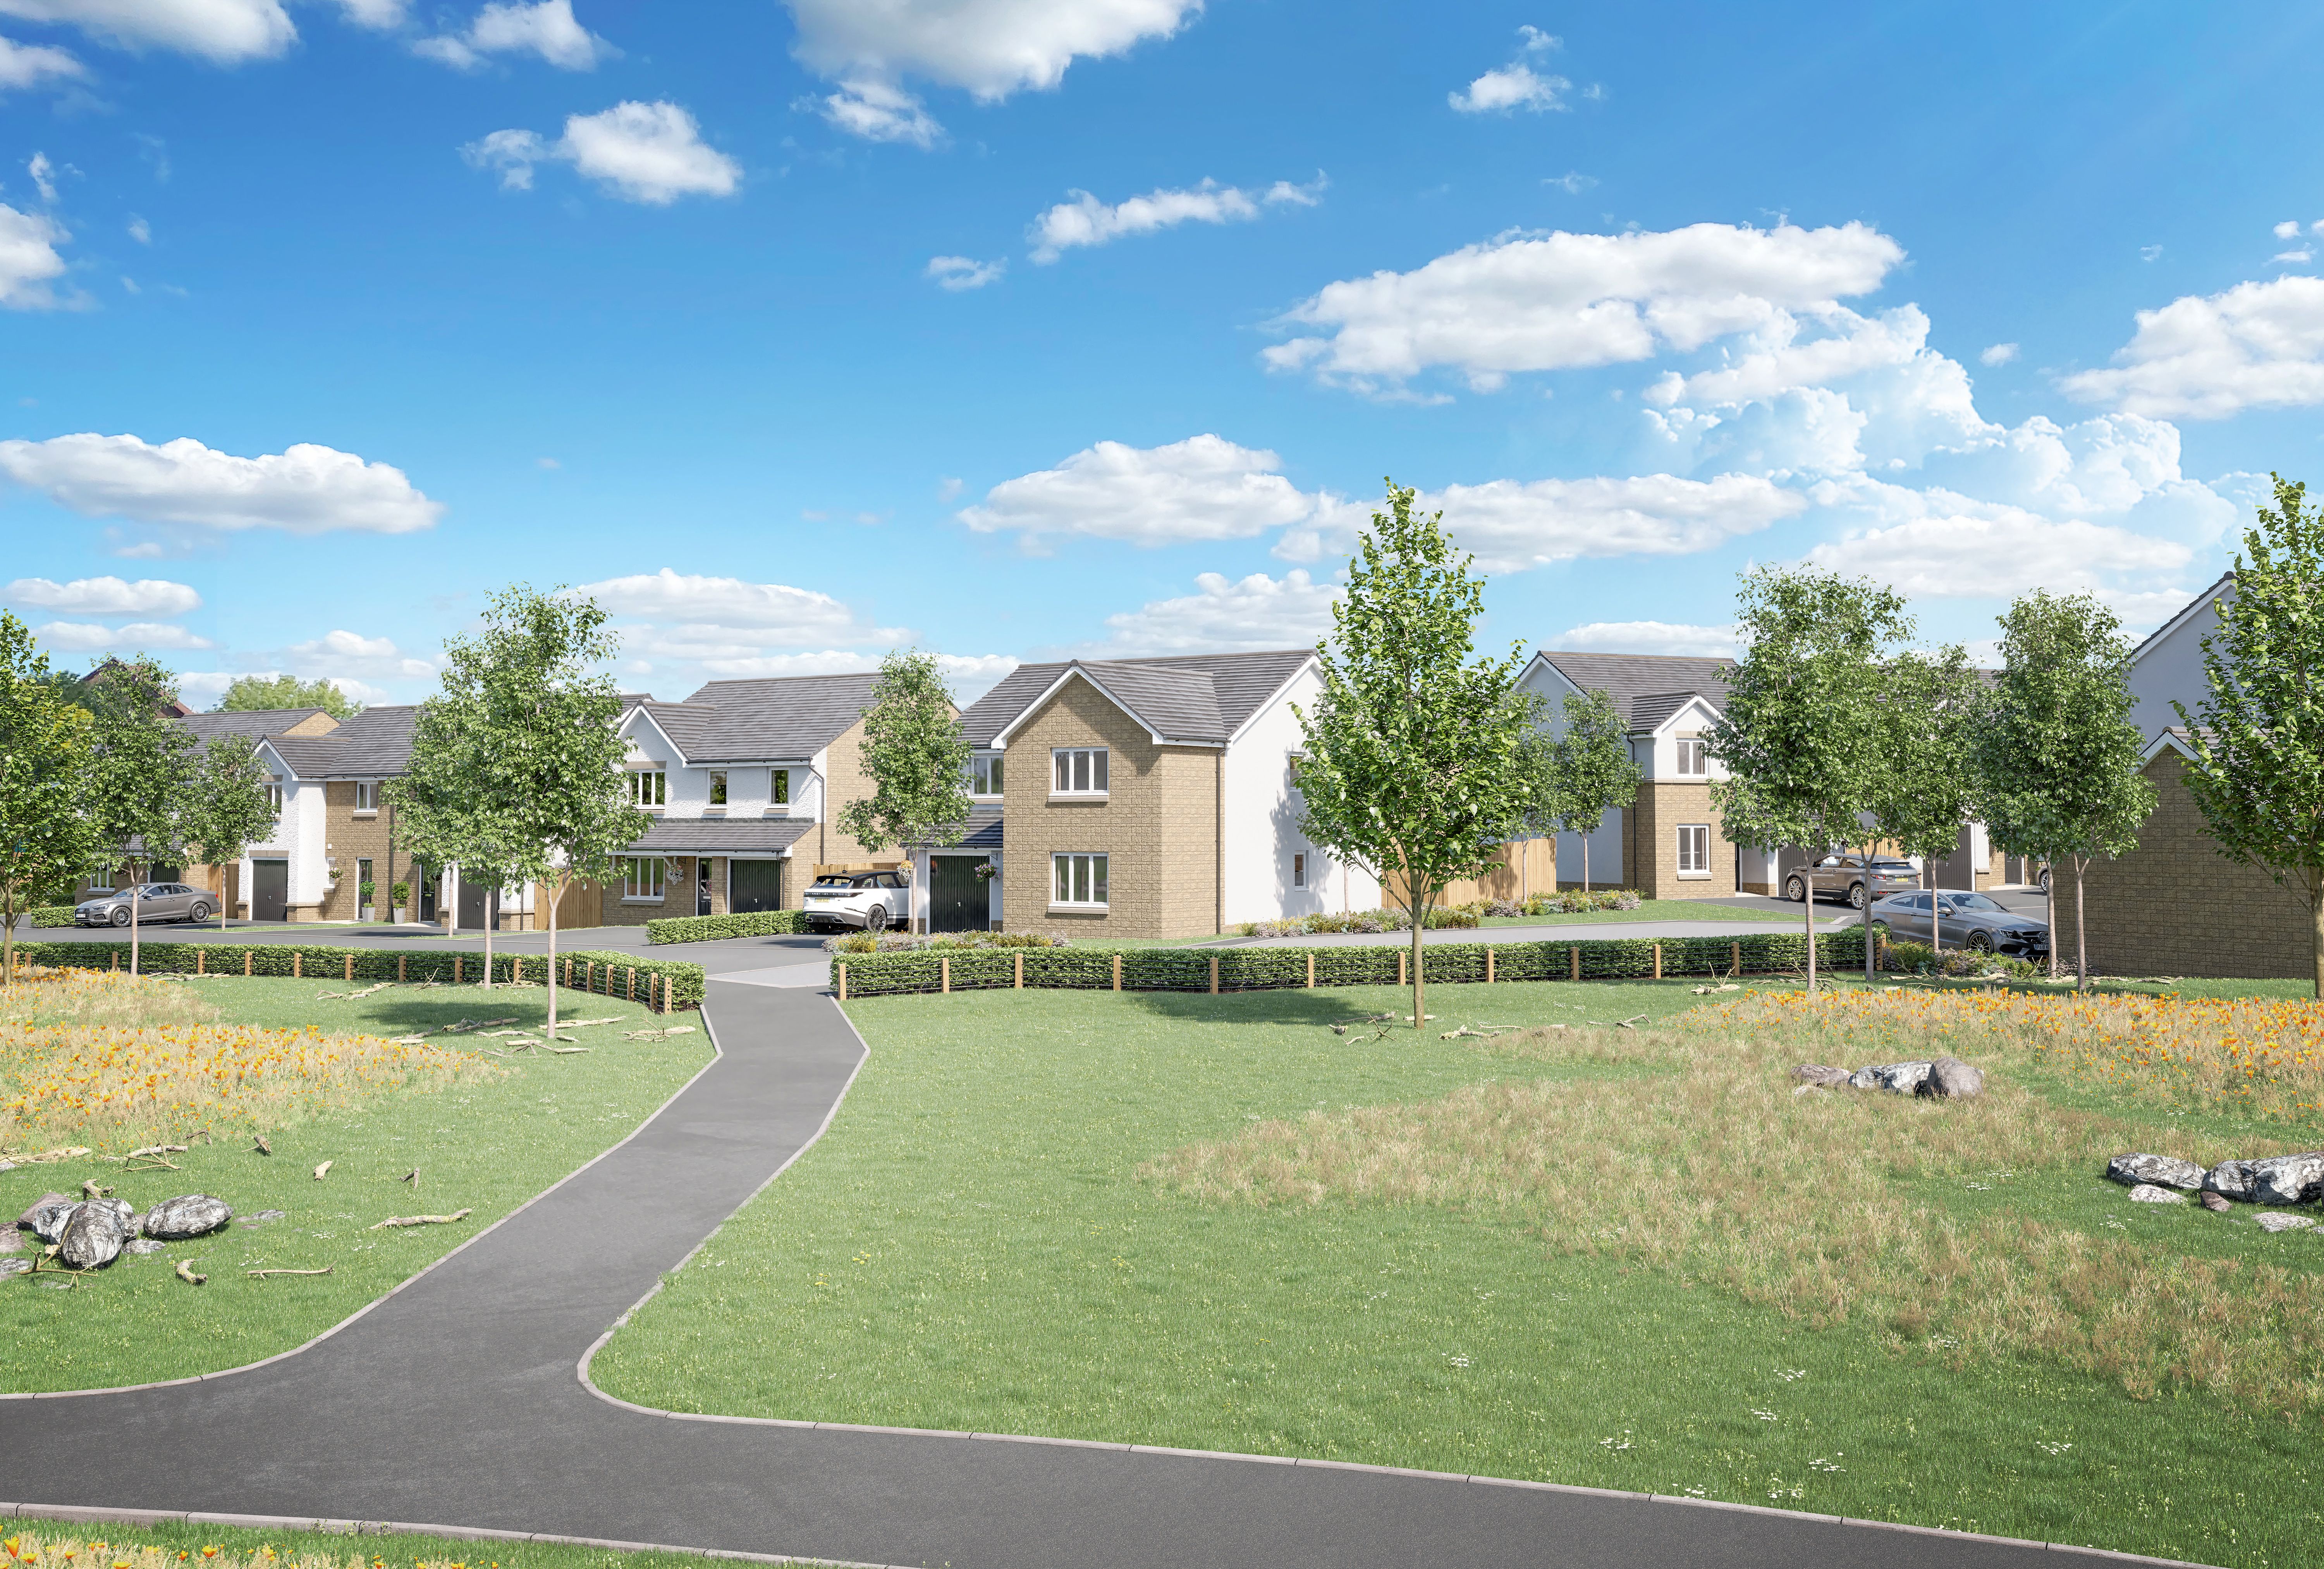 Taylor Wimpey submits detailed plans for Stoneyetts development